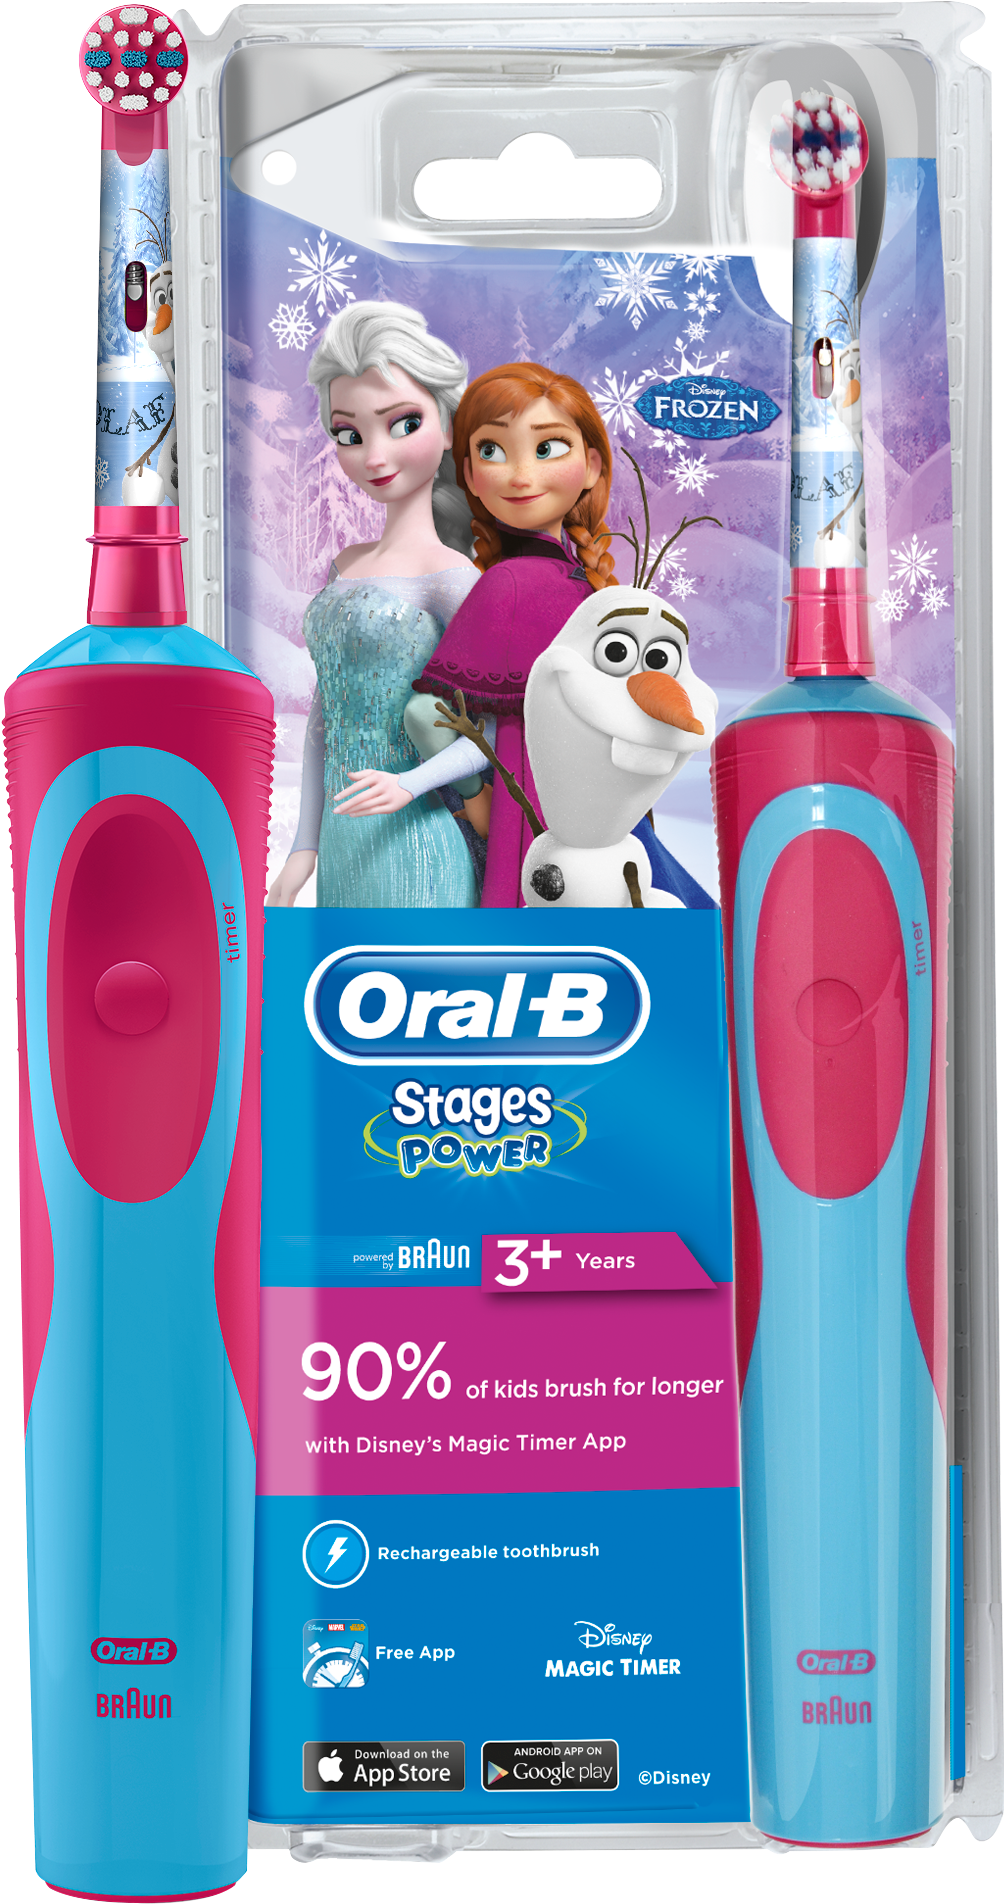 Share - Braun Oral B Frozen (2000x2000), Png Download